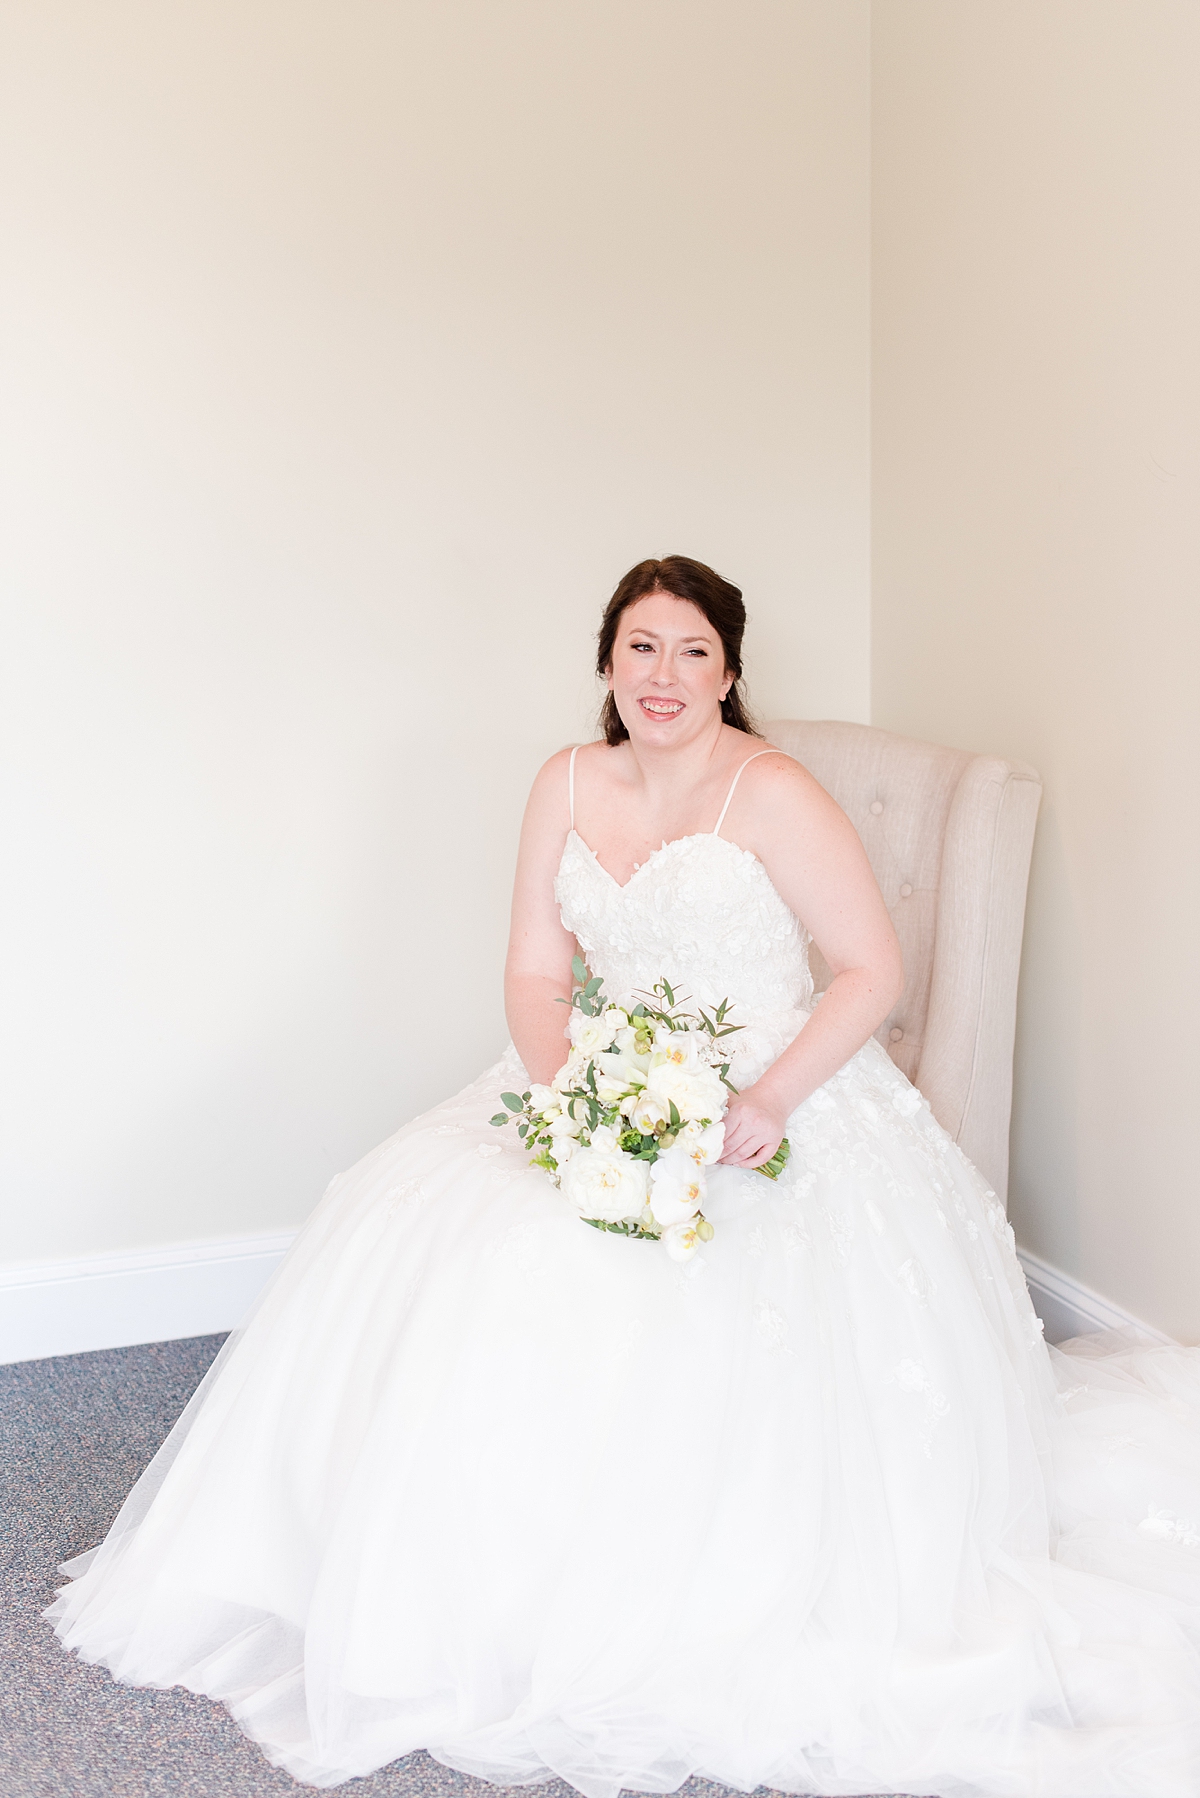 Bridal Portraits at The Dominion Club. Wedding Photography by Richmond Wedding Photographer Kailey Brianne Photography.